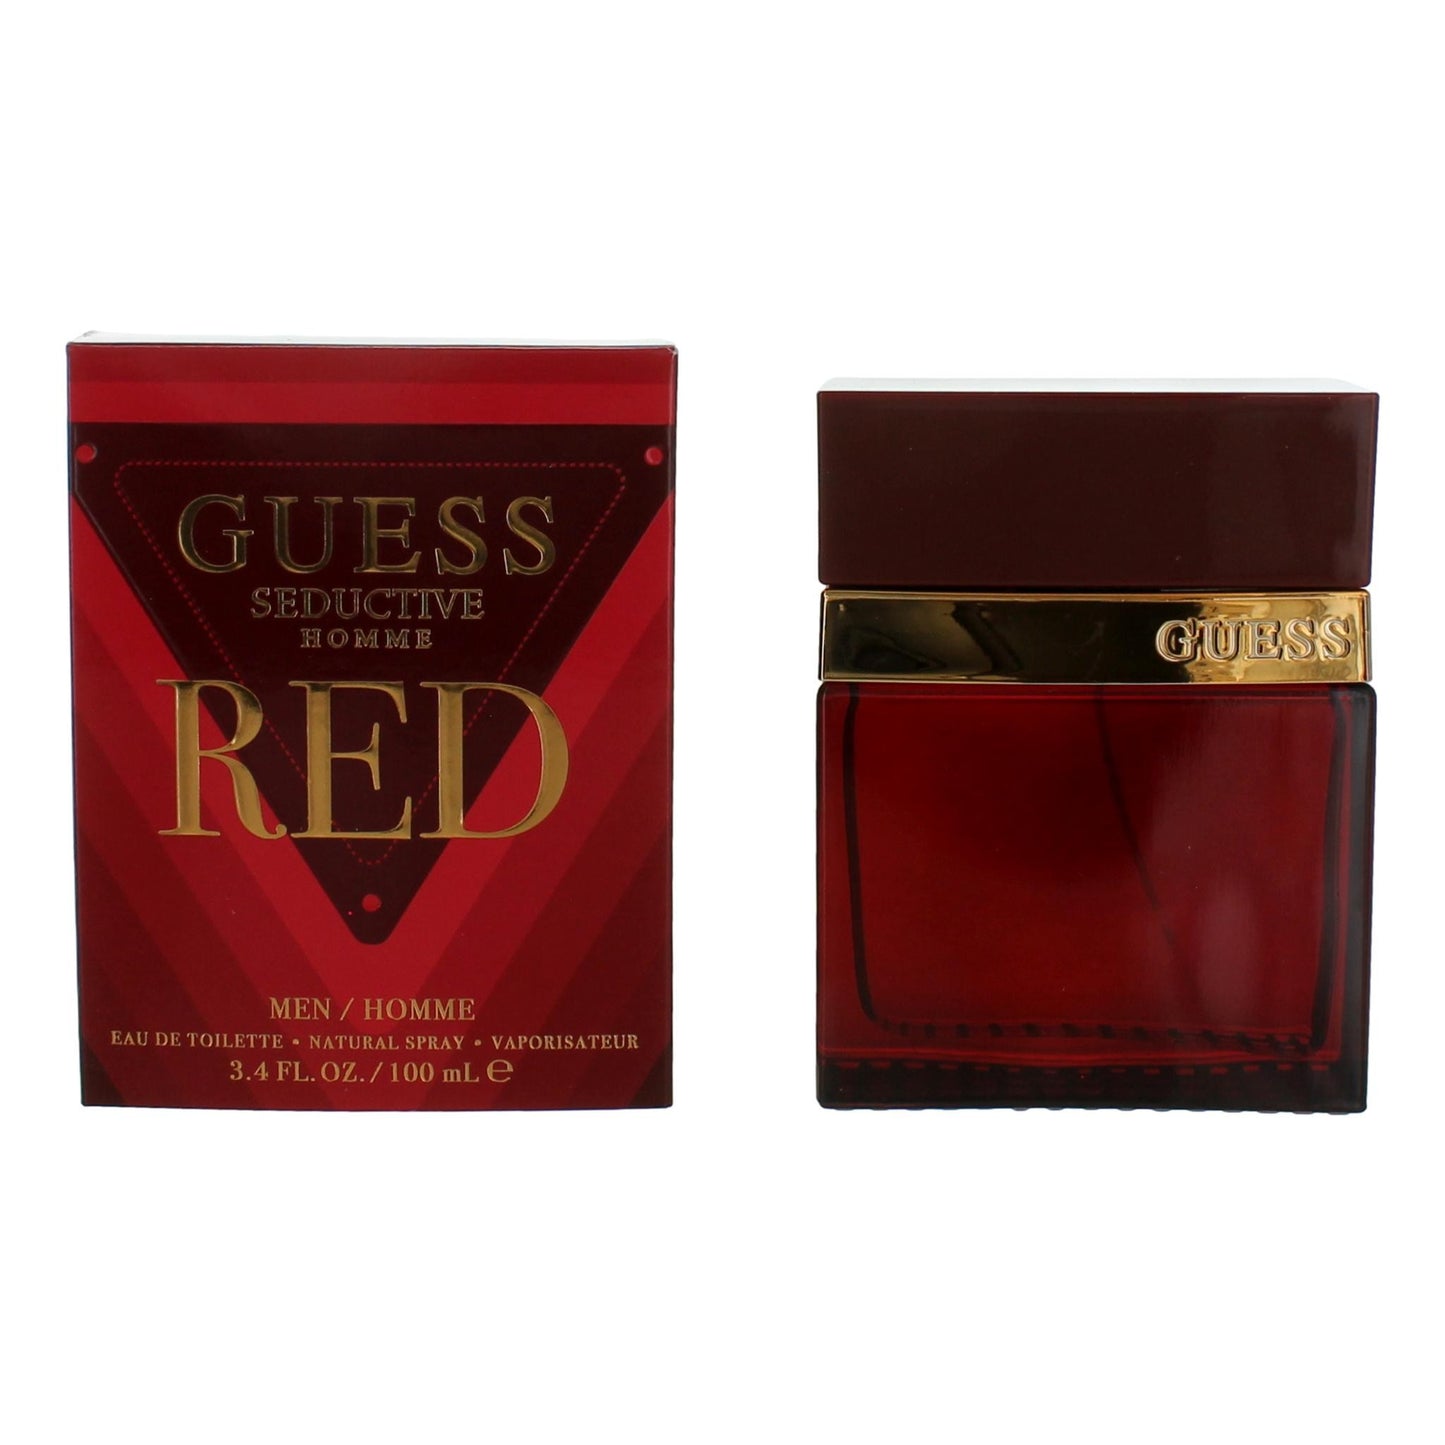 Guess Seductive Homme Red by Guess